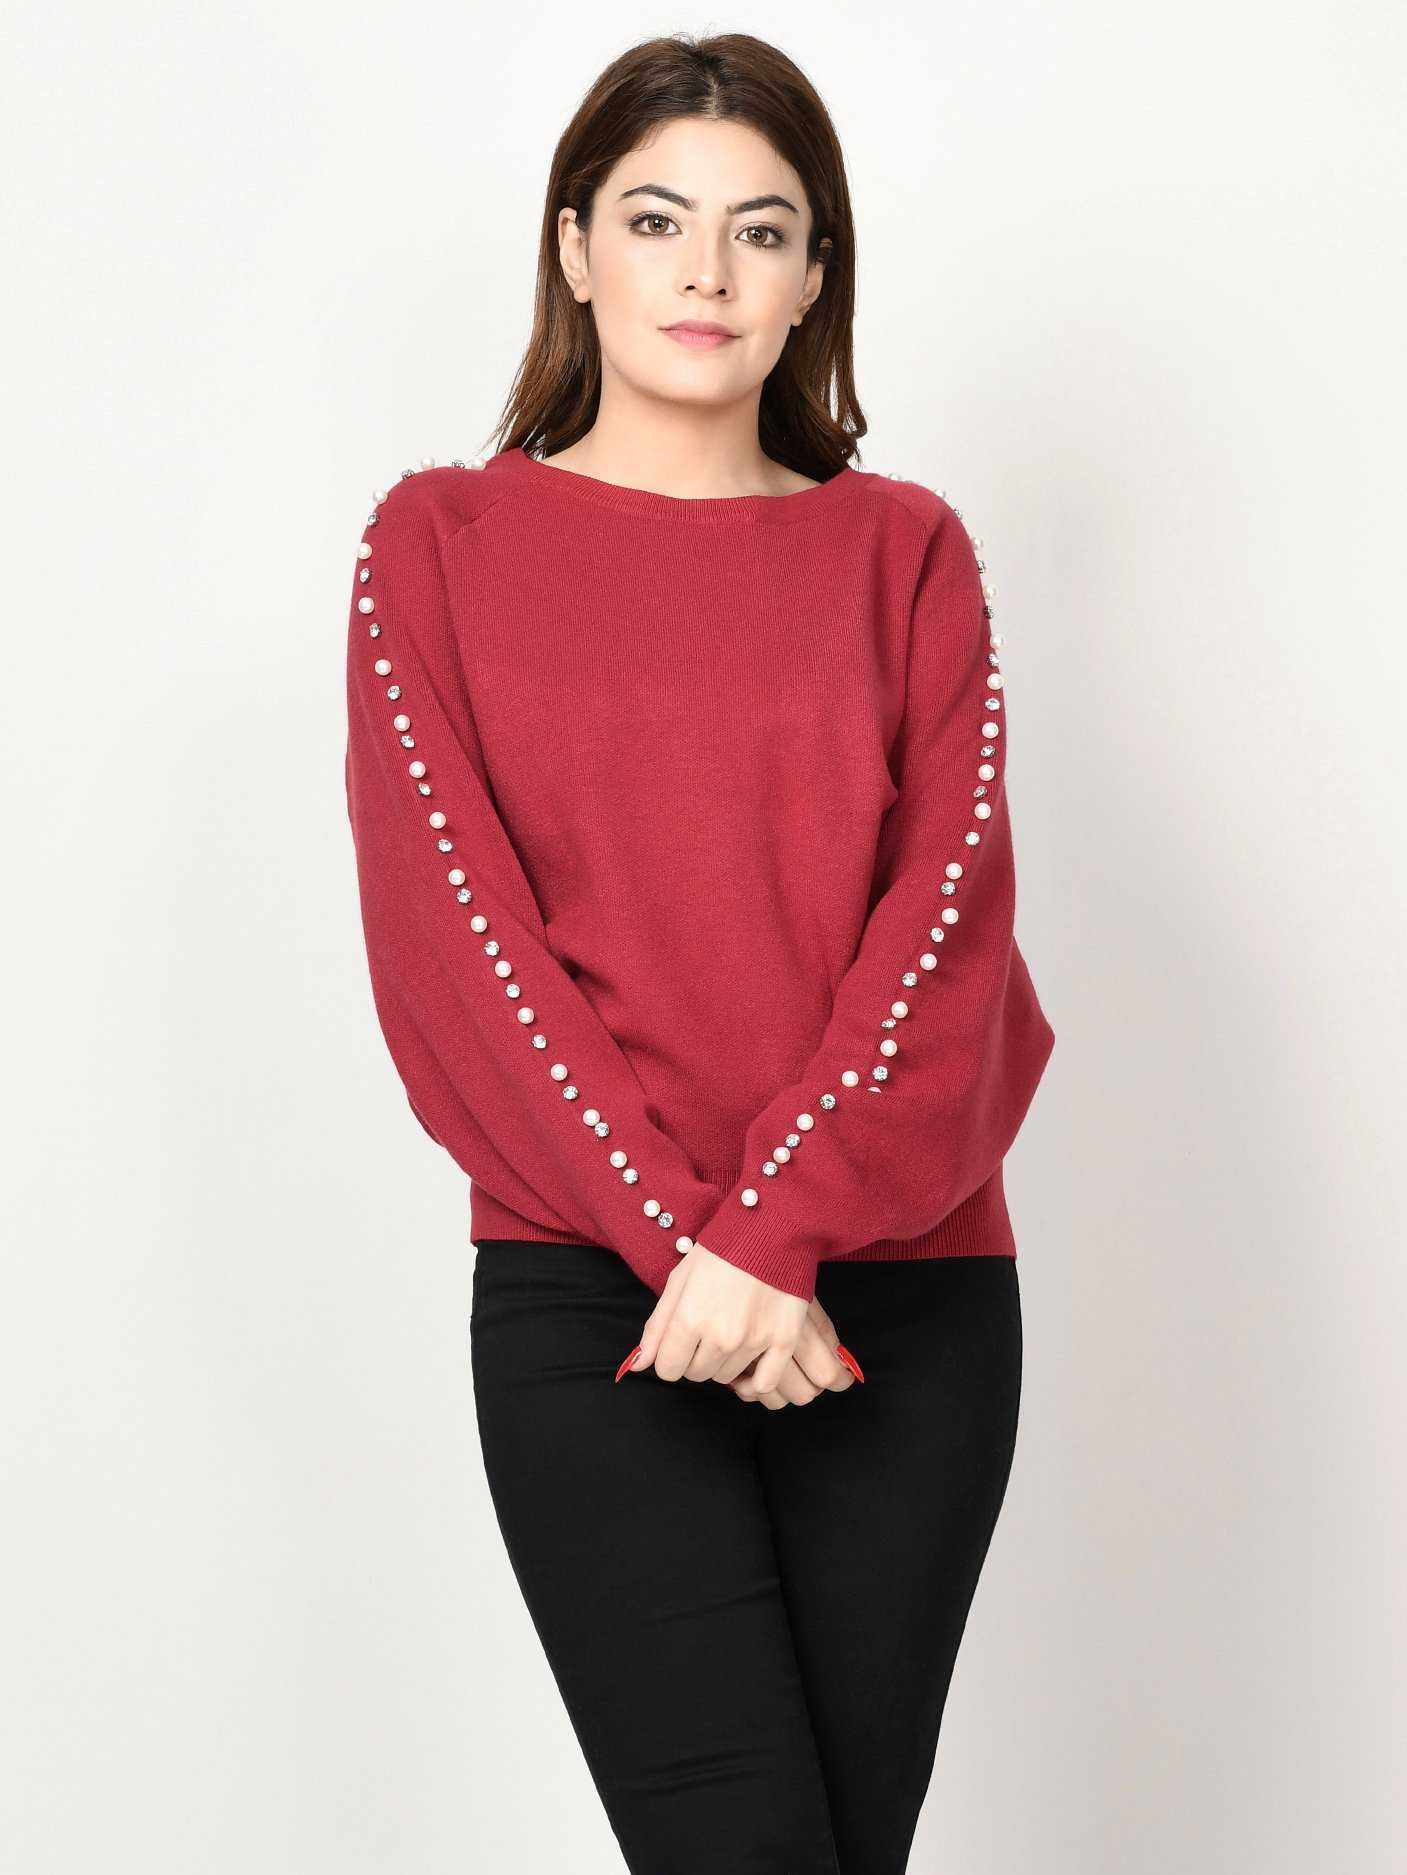 Limelight Diamante Embellished Sweater SWT98-FRE-RED 2019 | Limelight Sale 2020